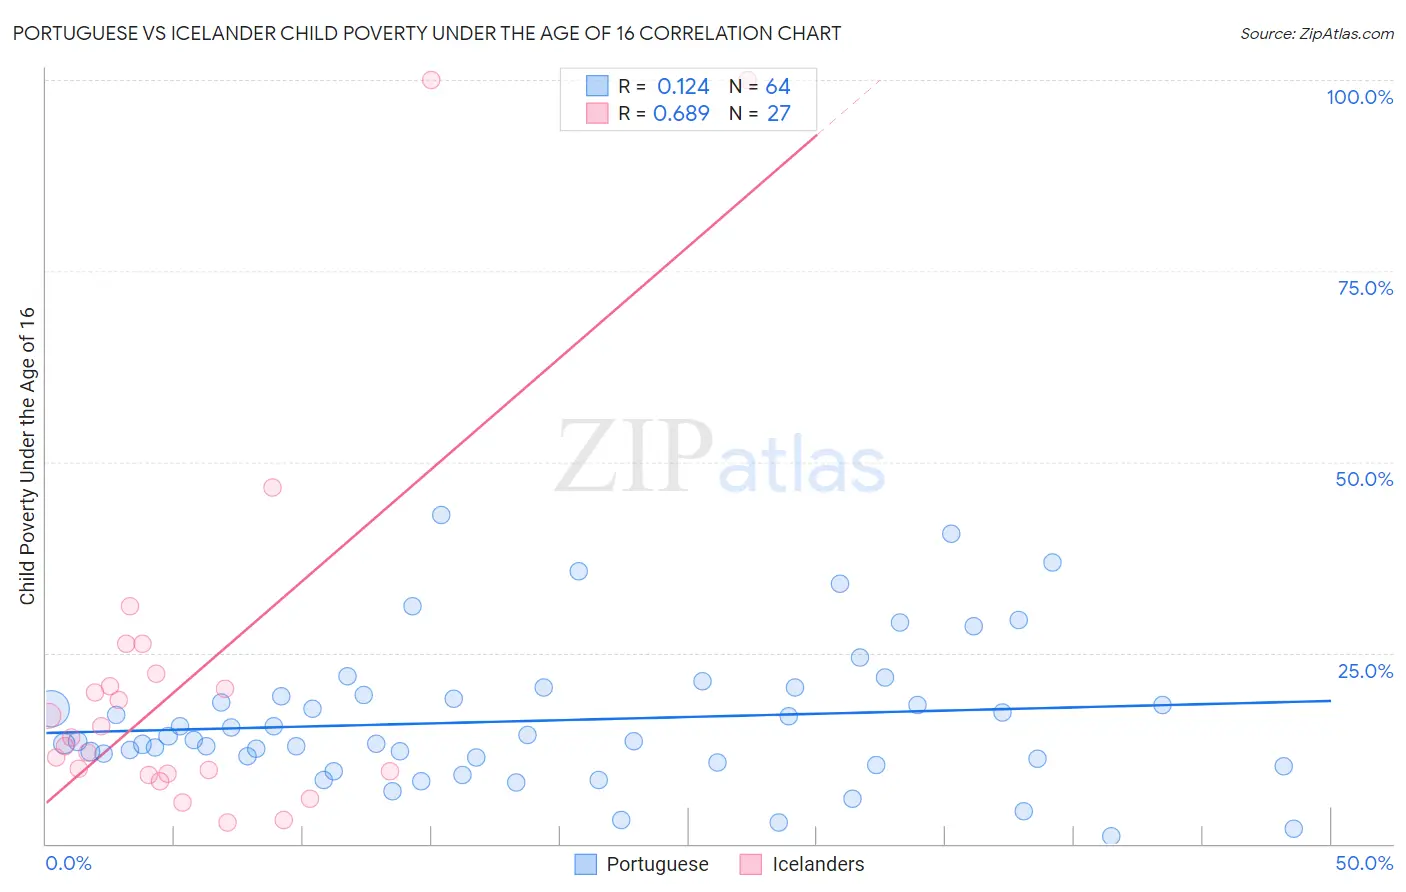 Portuguese vs Icelander Child Poverty Under the Age of 16